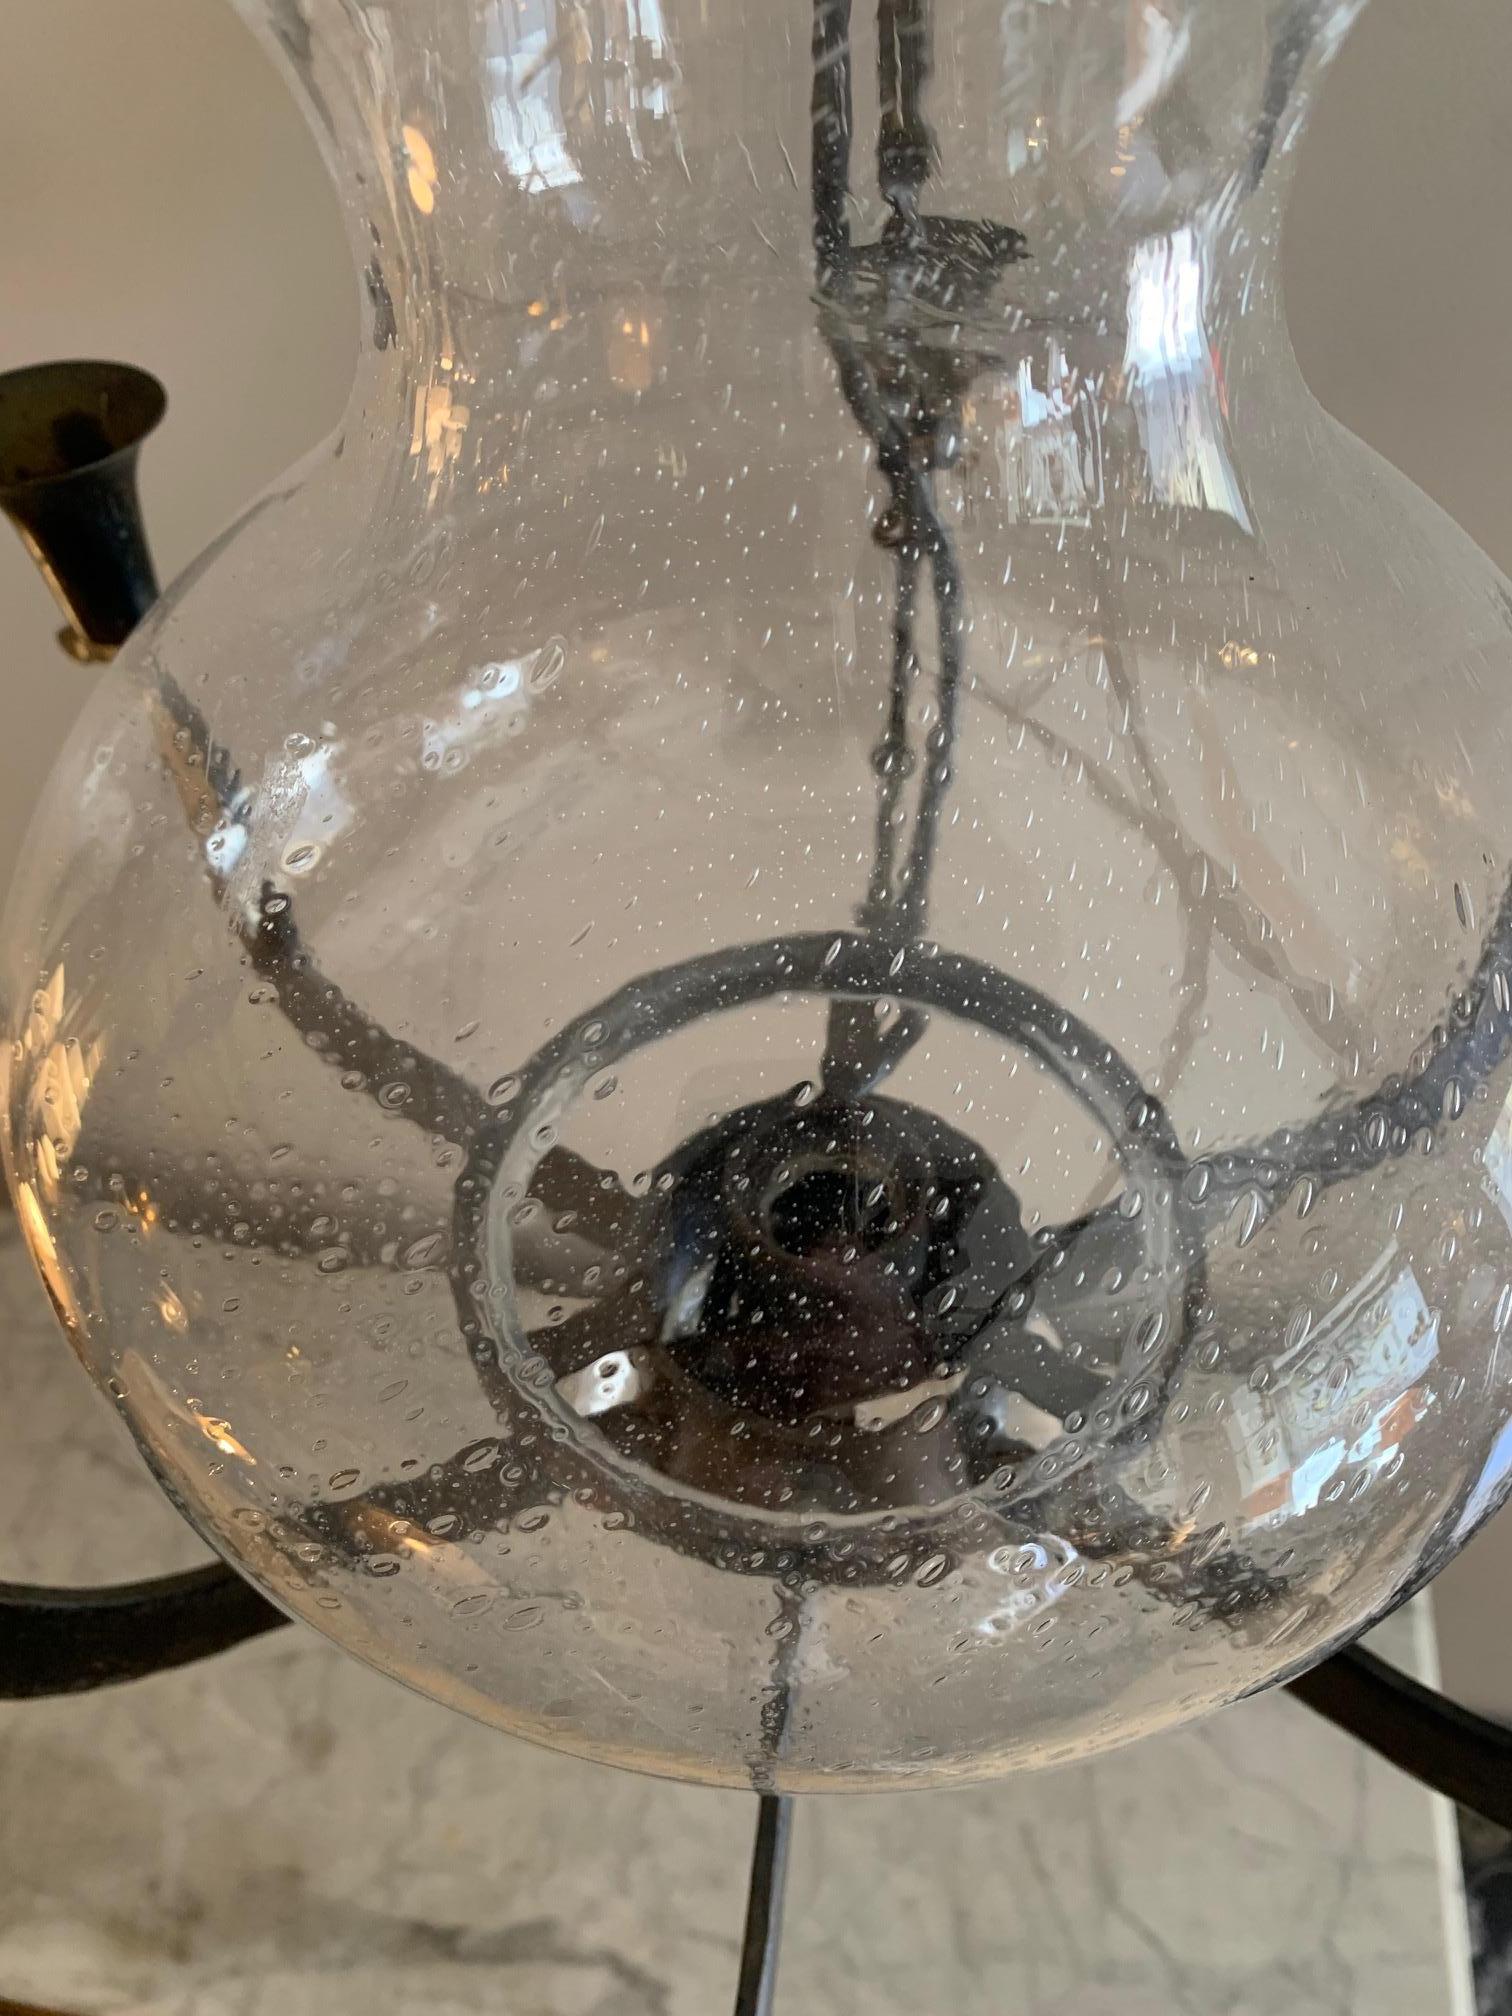 Swedish ceiling lamp from the middle of the 20th century, attributed to the designer Rolf Sinnemark, the lamp is made of iron with six arms for candles, the central part is a glass globe with a socket for a light bulb, it combines the traditional